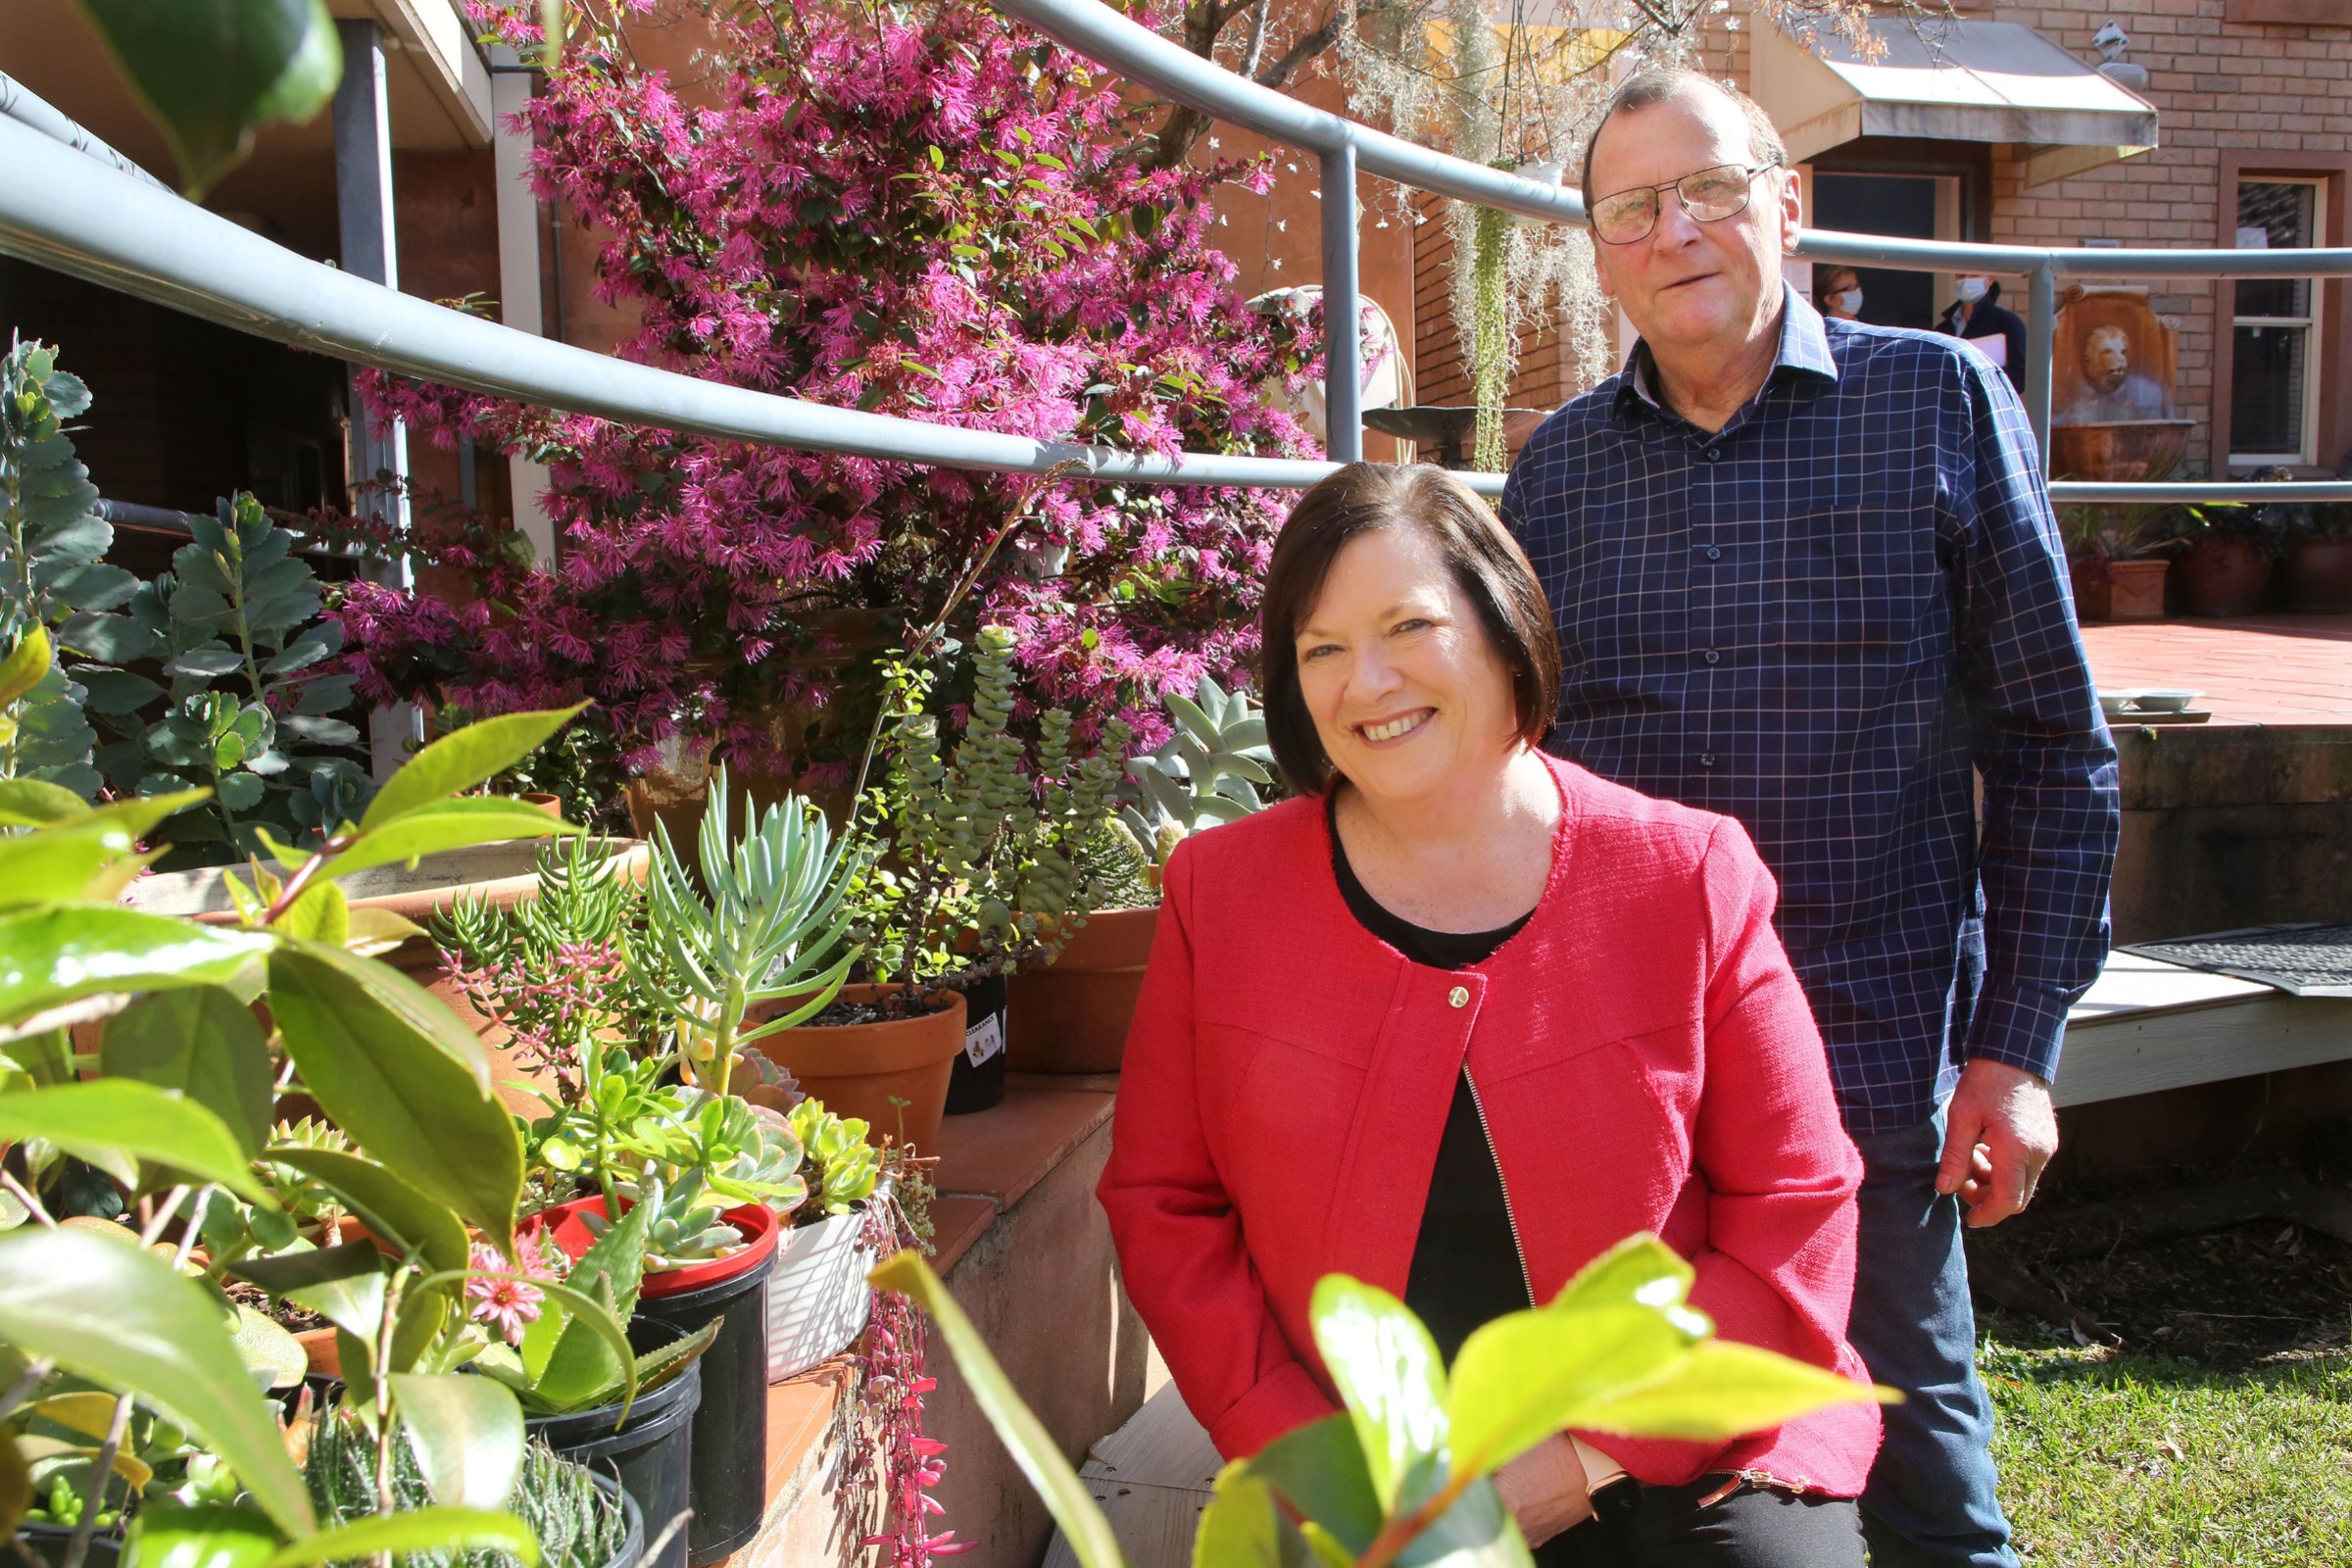 Karen and Geoff Diefenbach sit in the garden of Bezzina House, surrounded by lush plants